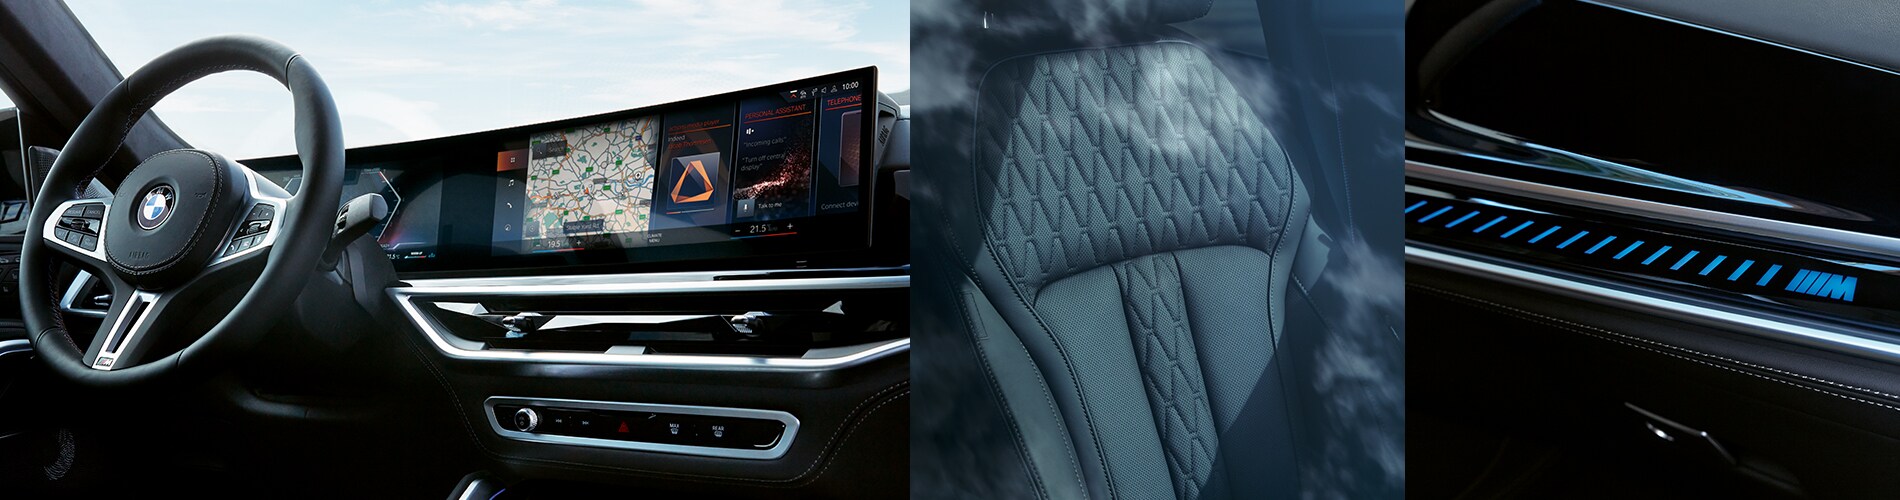 New, tech-forward BMW curved display, comfortable leather seats, and color changing dynamic light bar